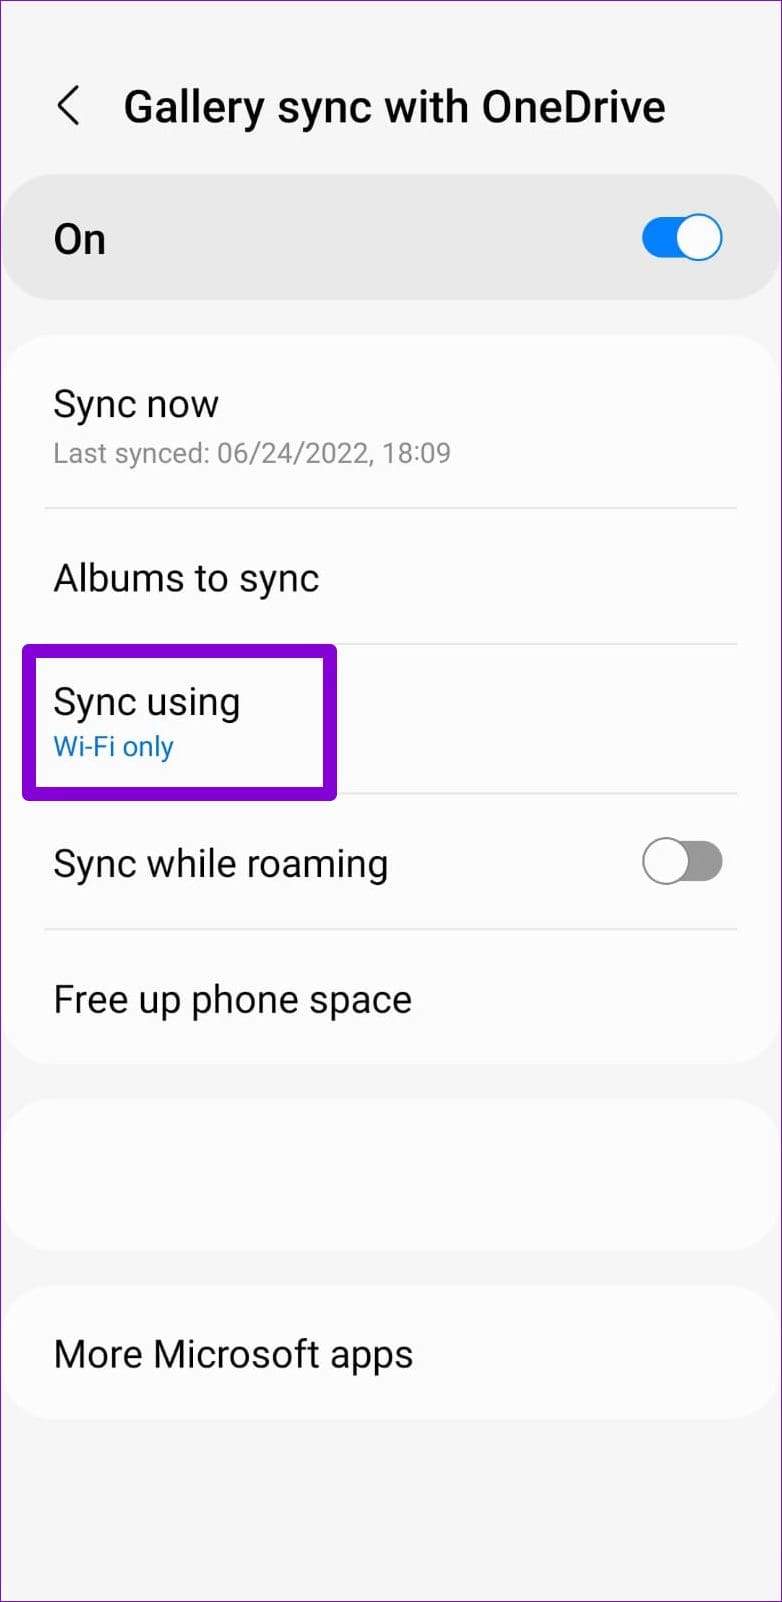 Configure OneDrive Sync in the Gallery App